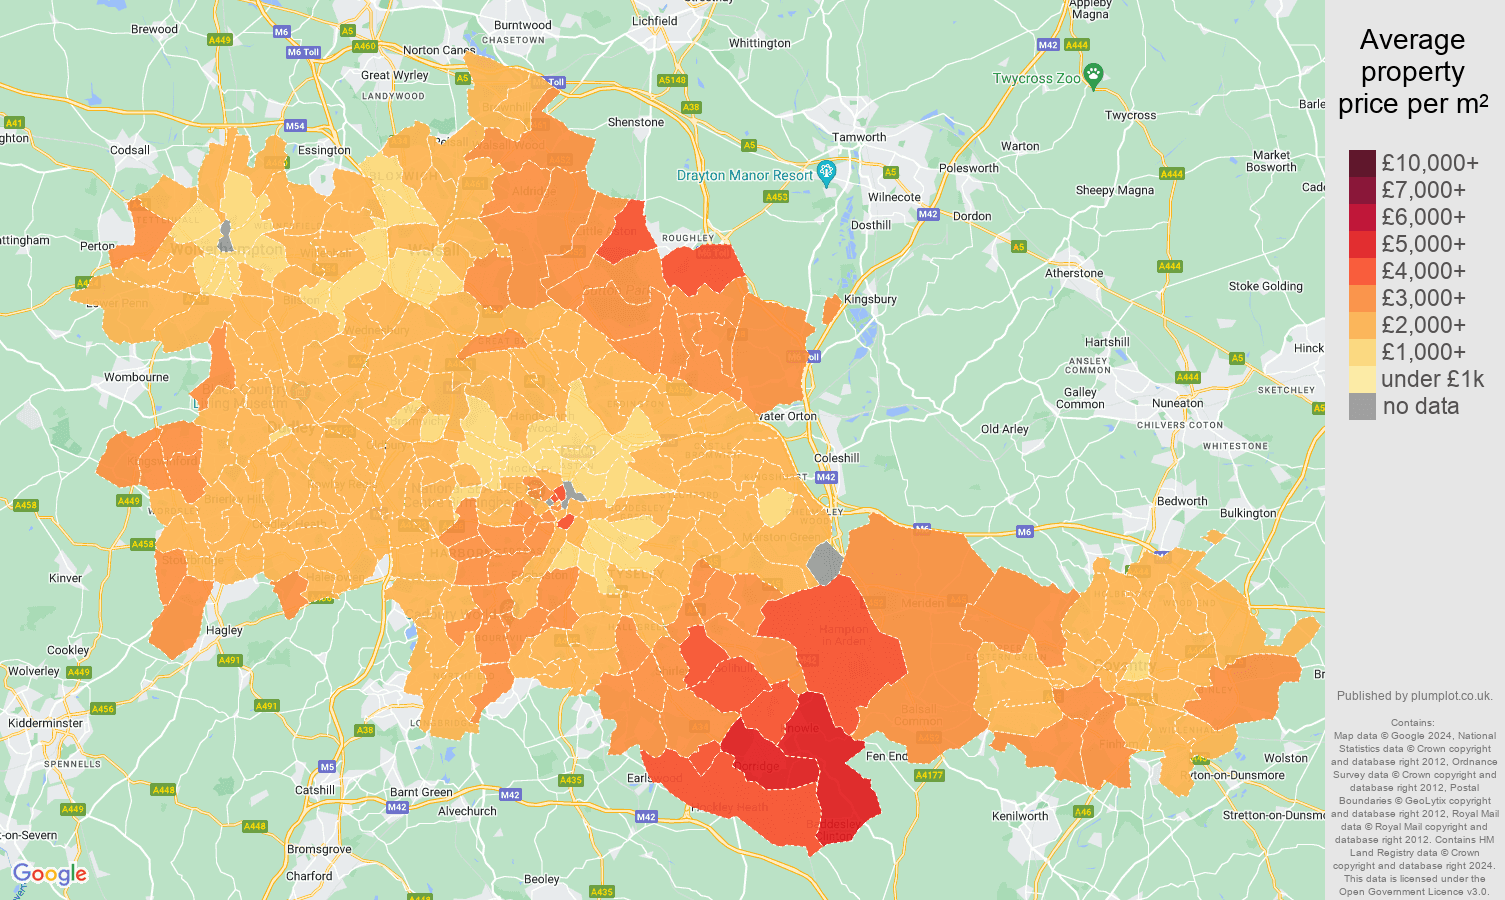 West Midlands county house prices per square metre map